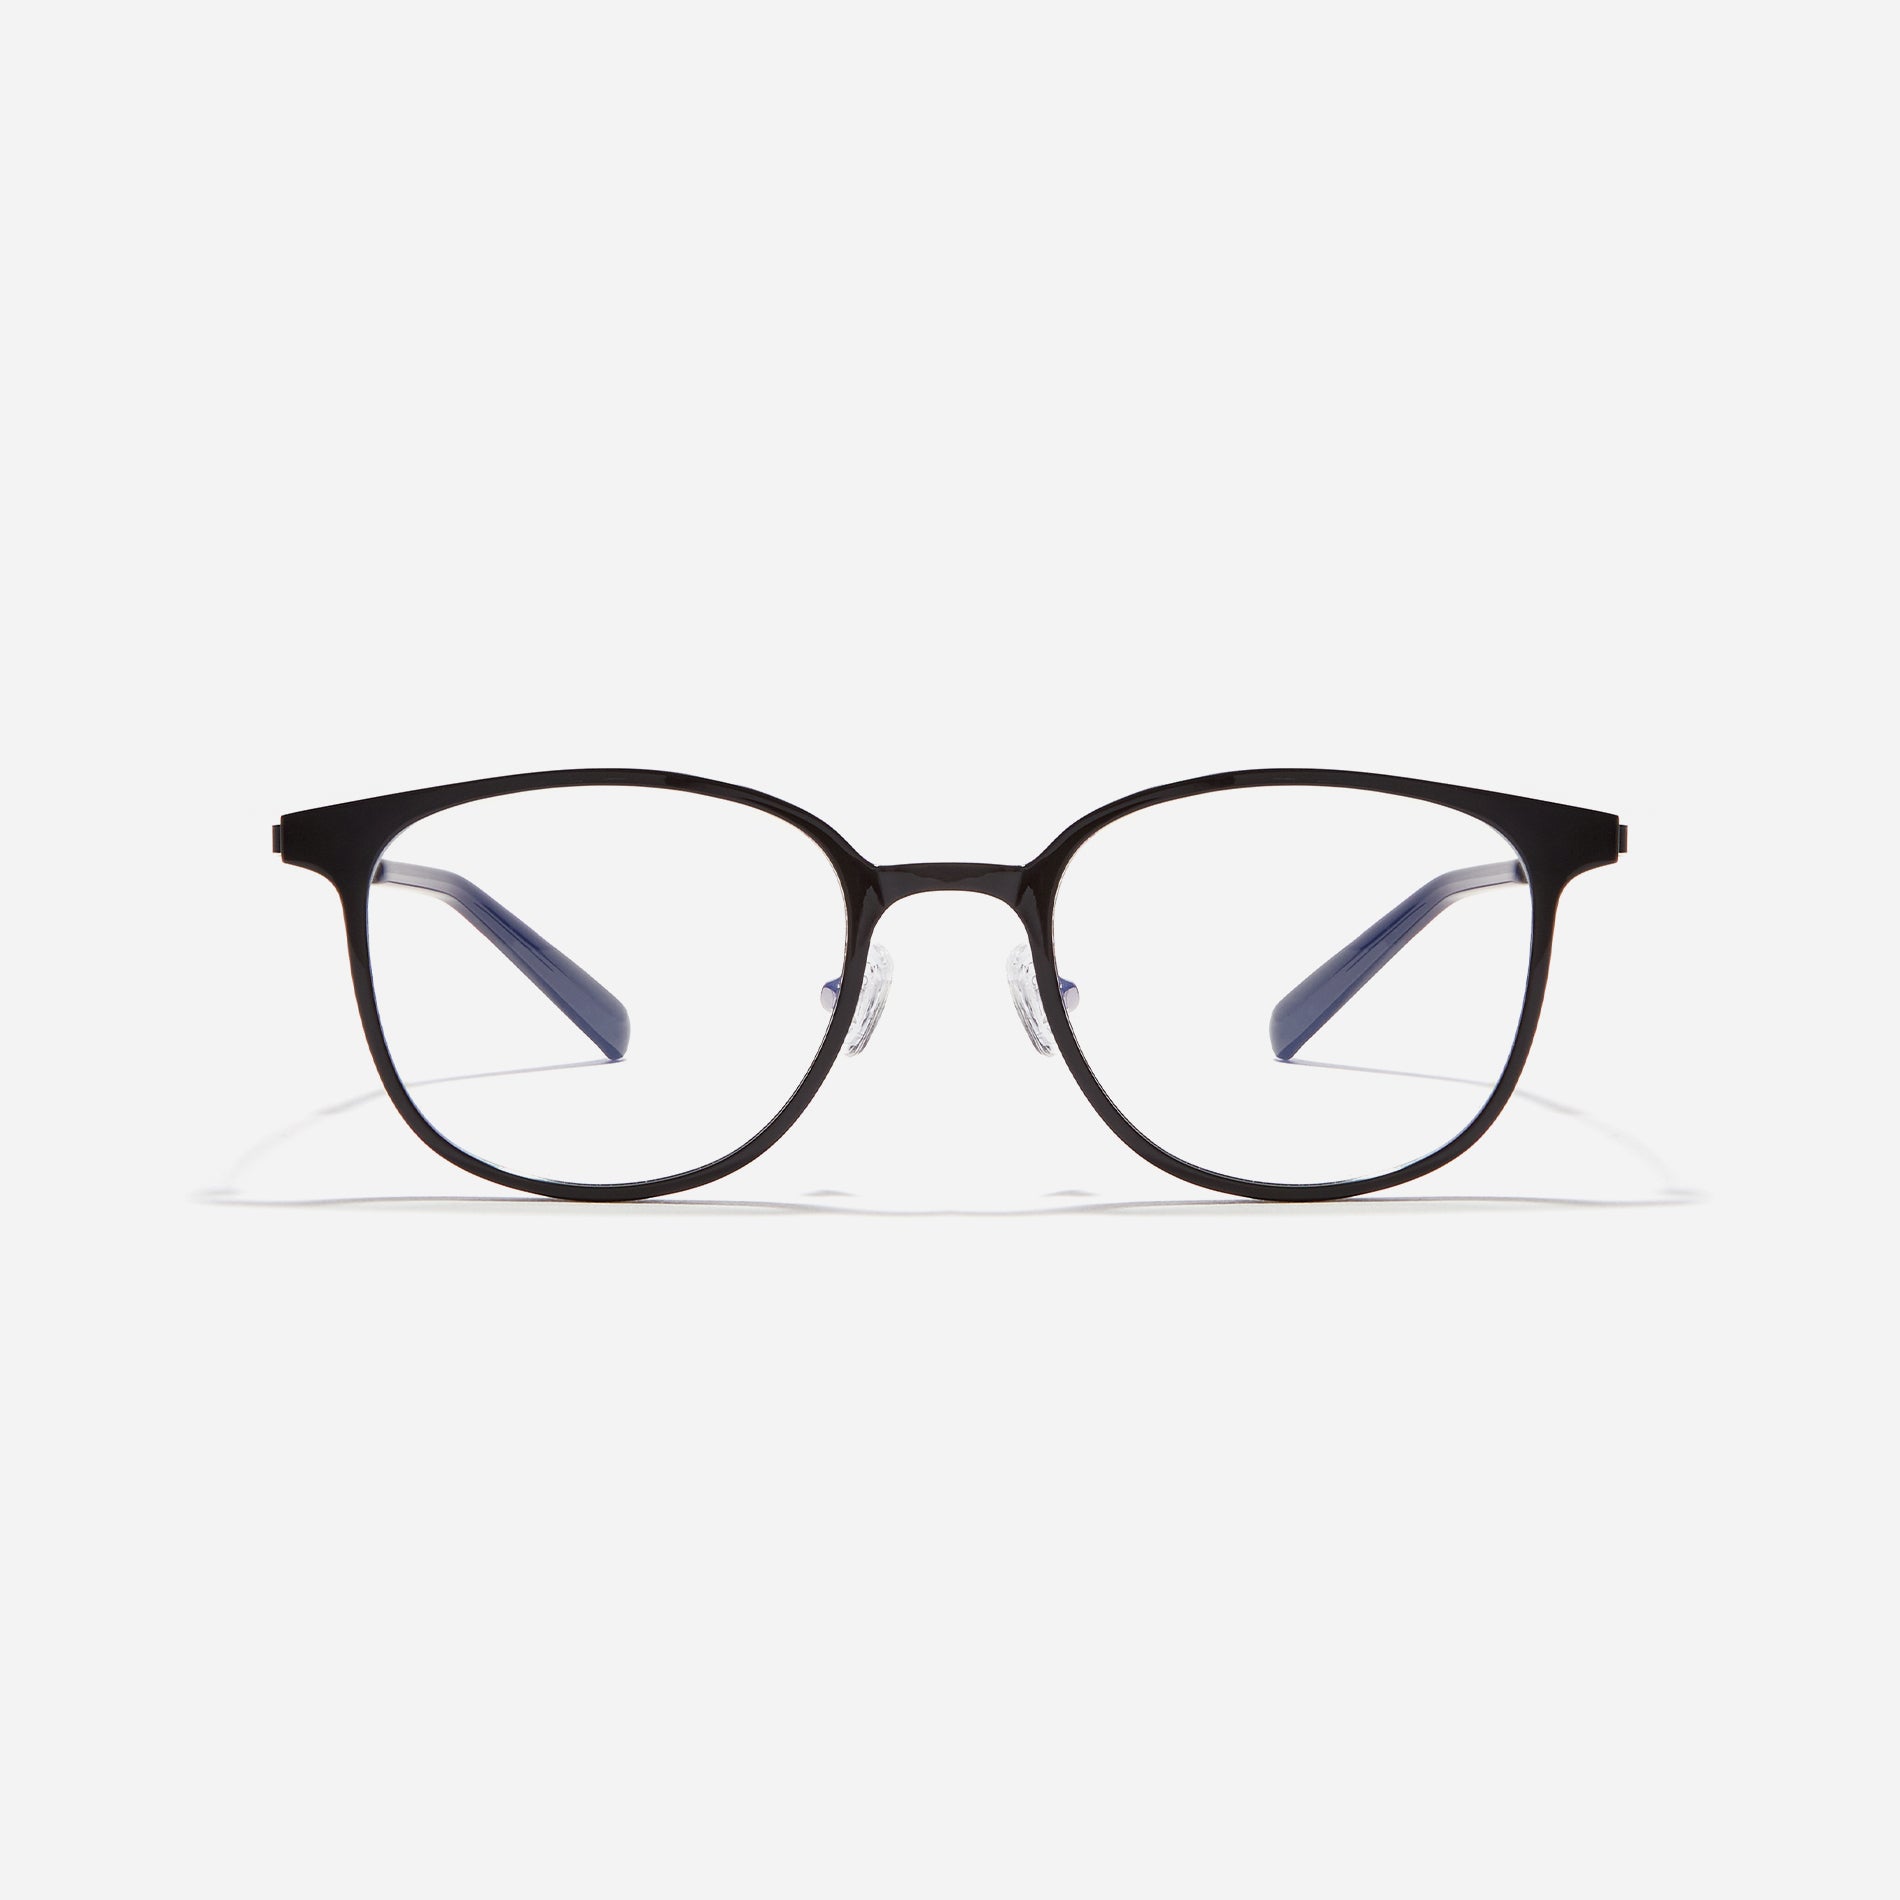 Square-shaped combination eyeglasses that provide a comfortable and durable wearing experience through a frame crafted using cutting-edge materials sourced from the French company ARKEMA, along with stainless Wagner steel temples.